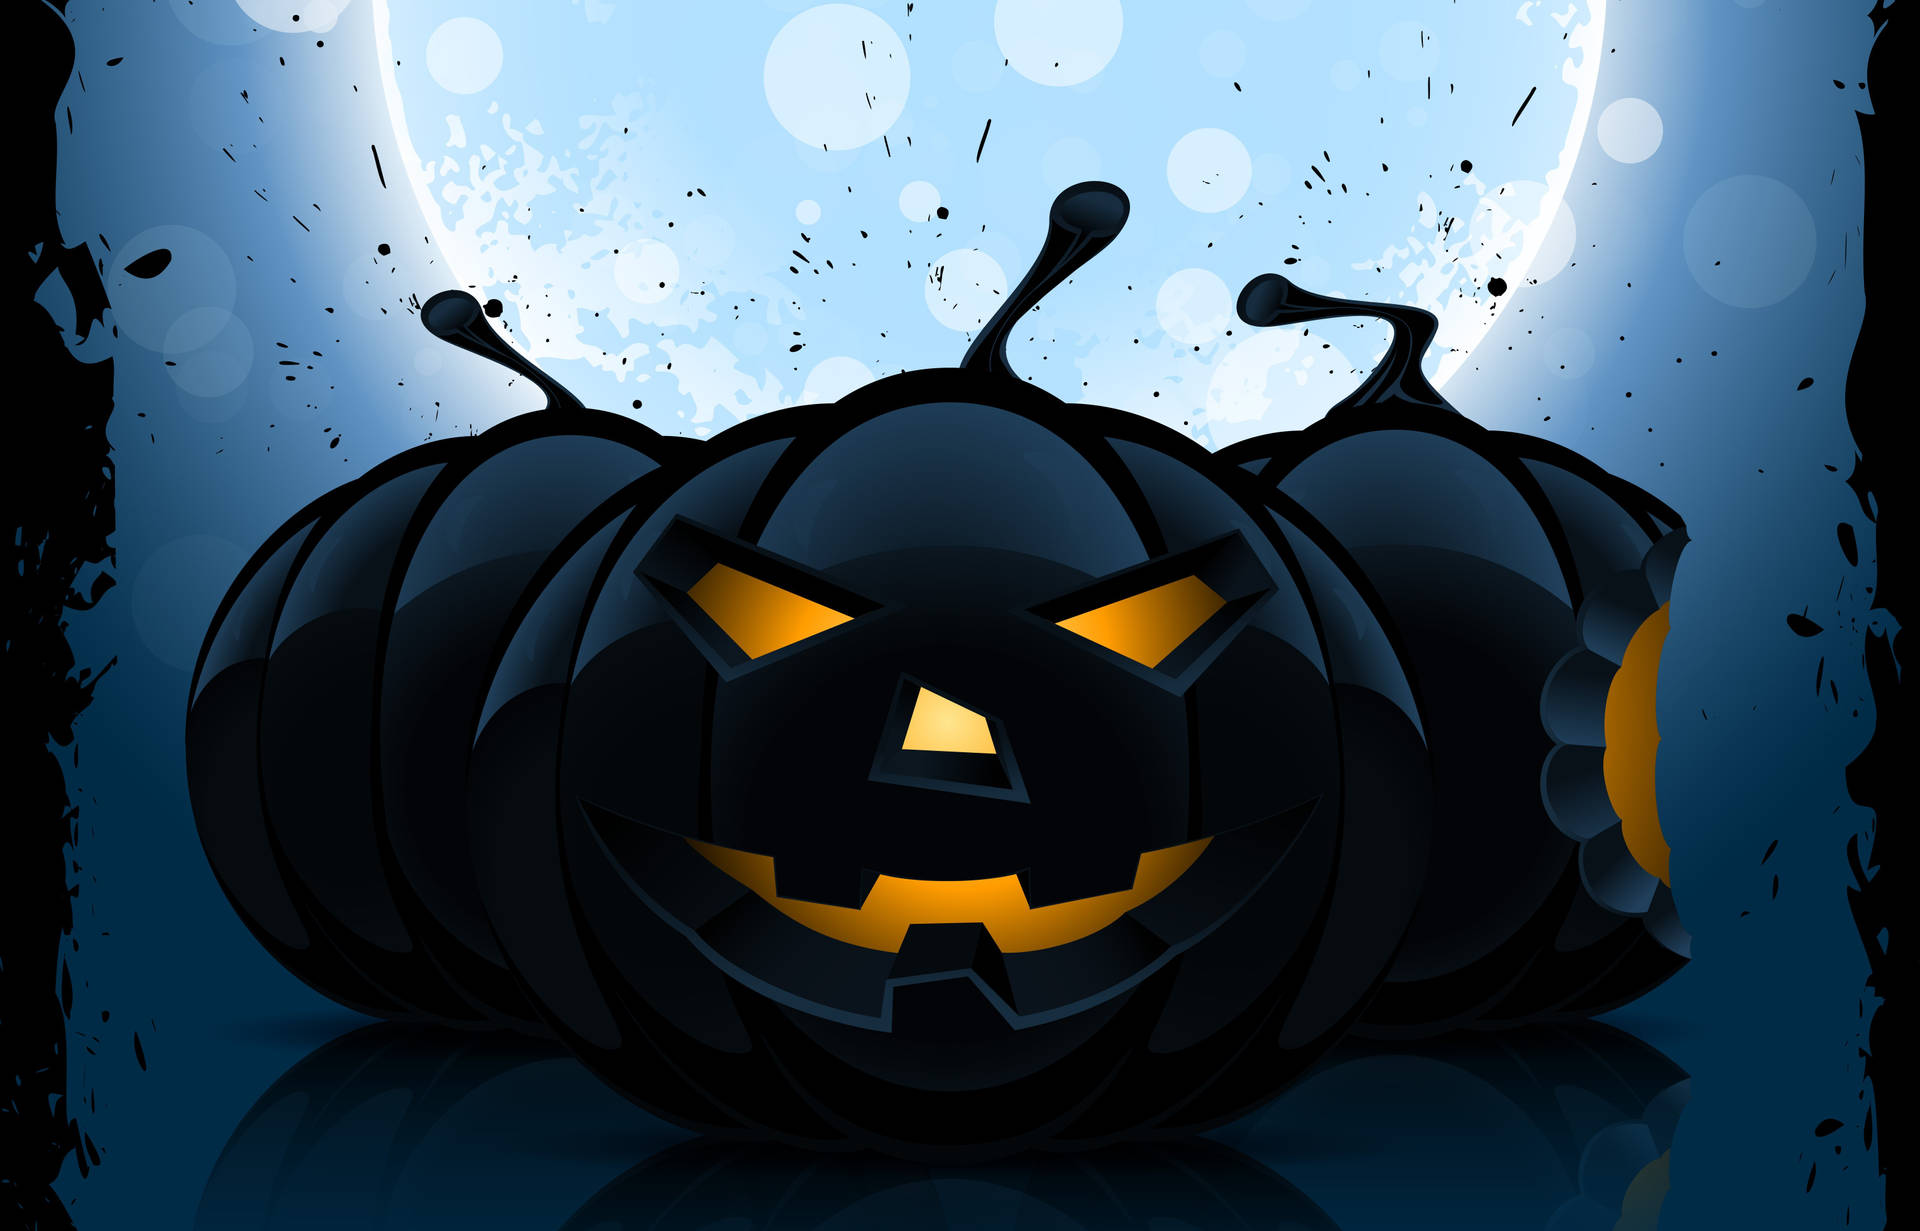 Celebrate A Spooktacular Halloween With This Glowing Black Pumpkin Background